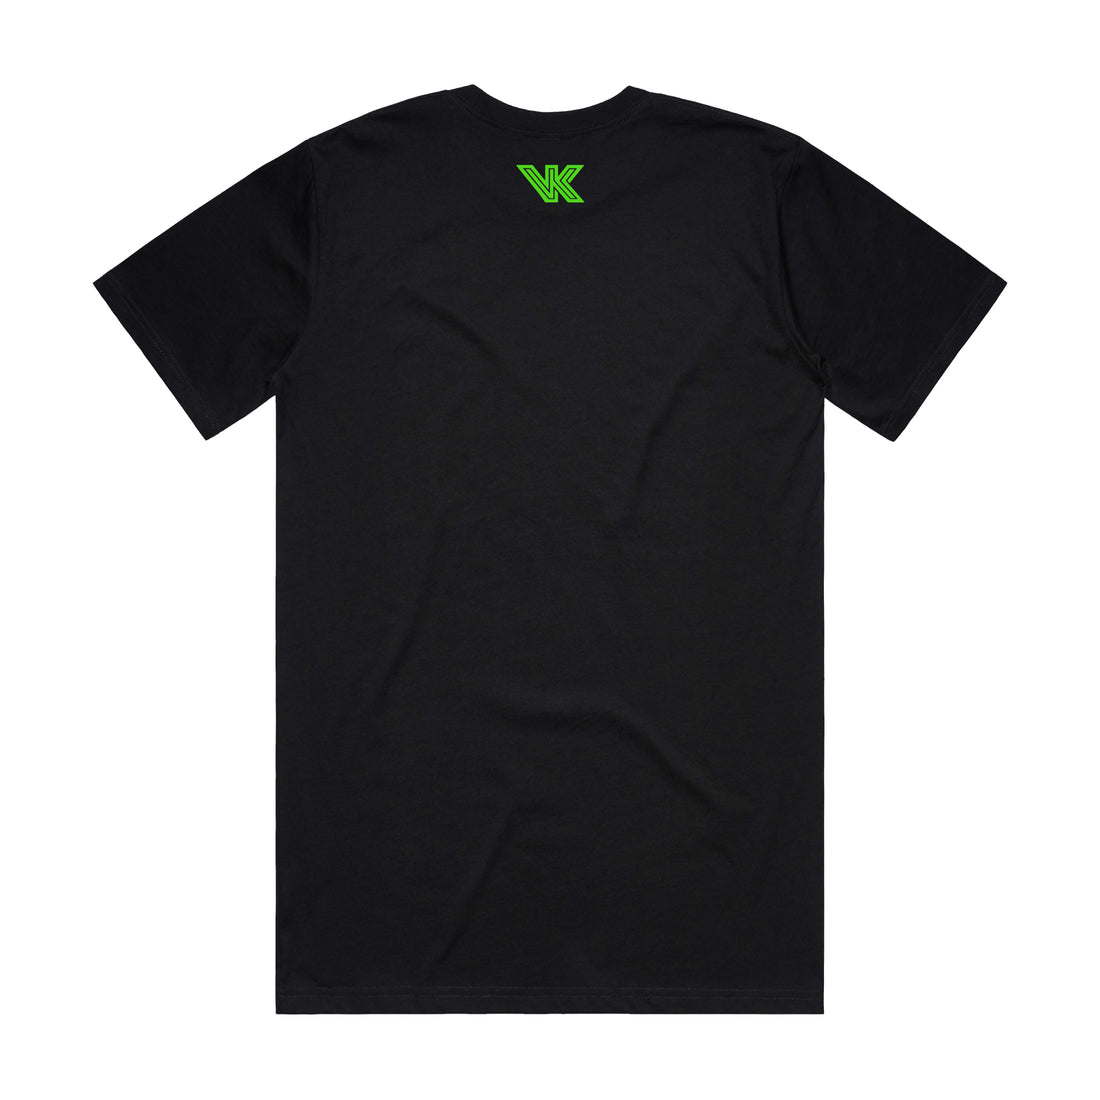 Valentino Khan - PBLX AFTER HOURS - Tee